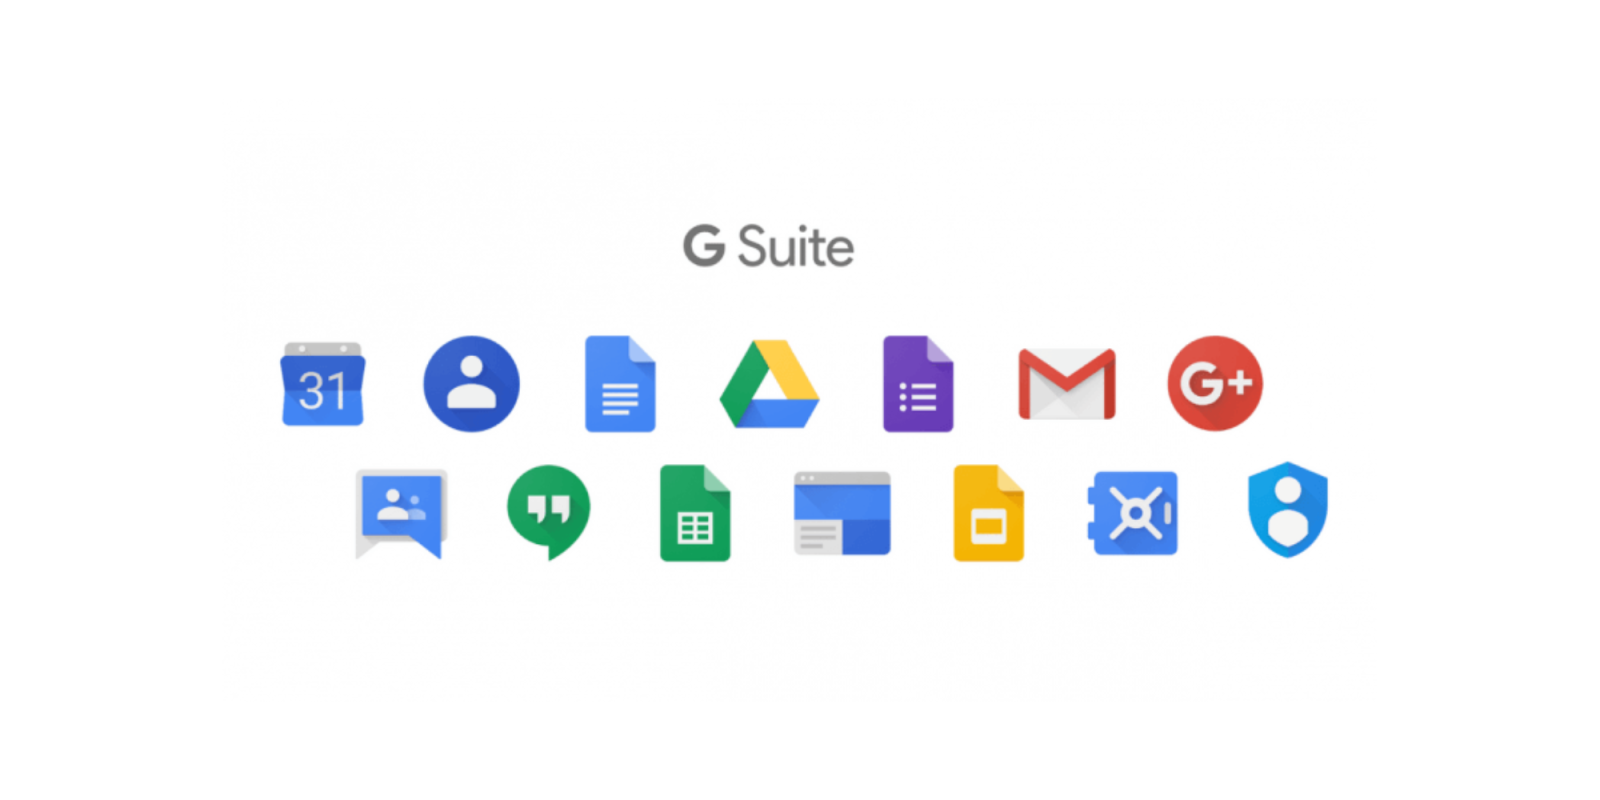 What is G Suite?